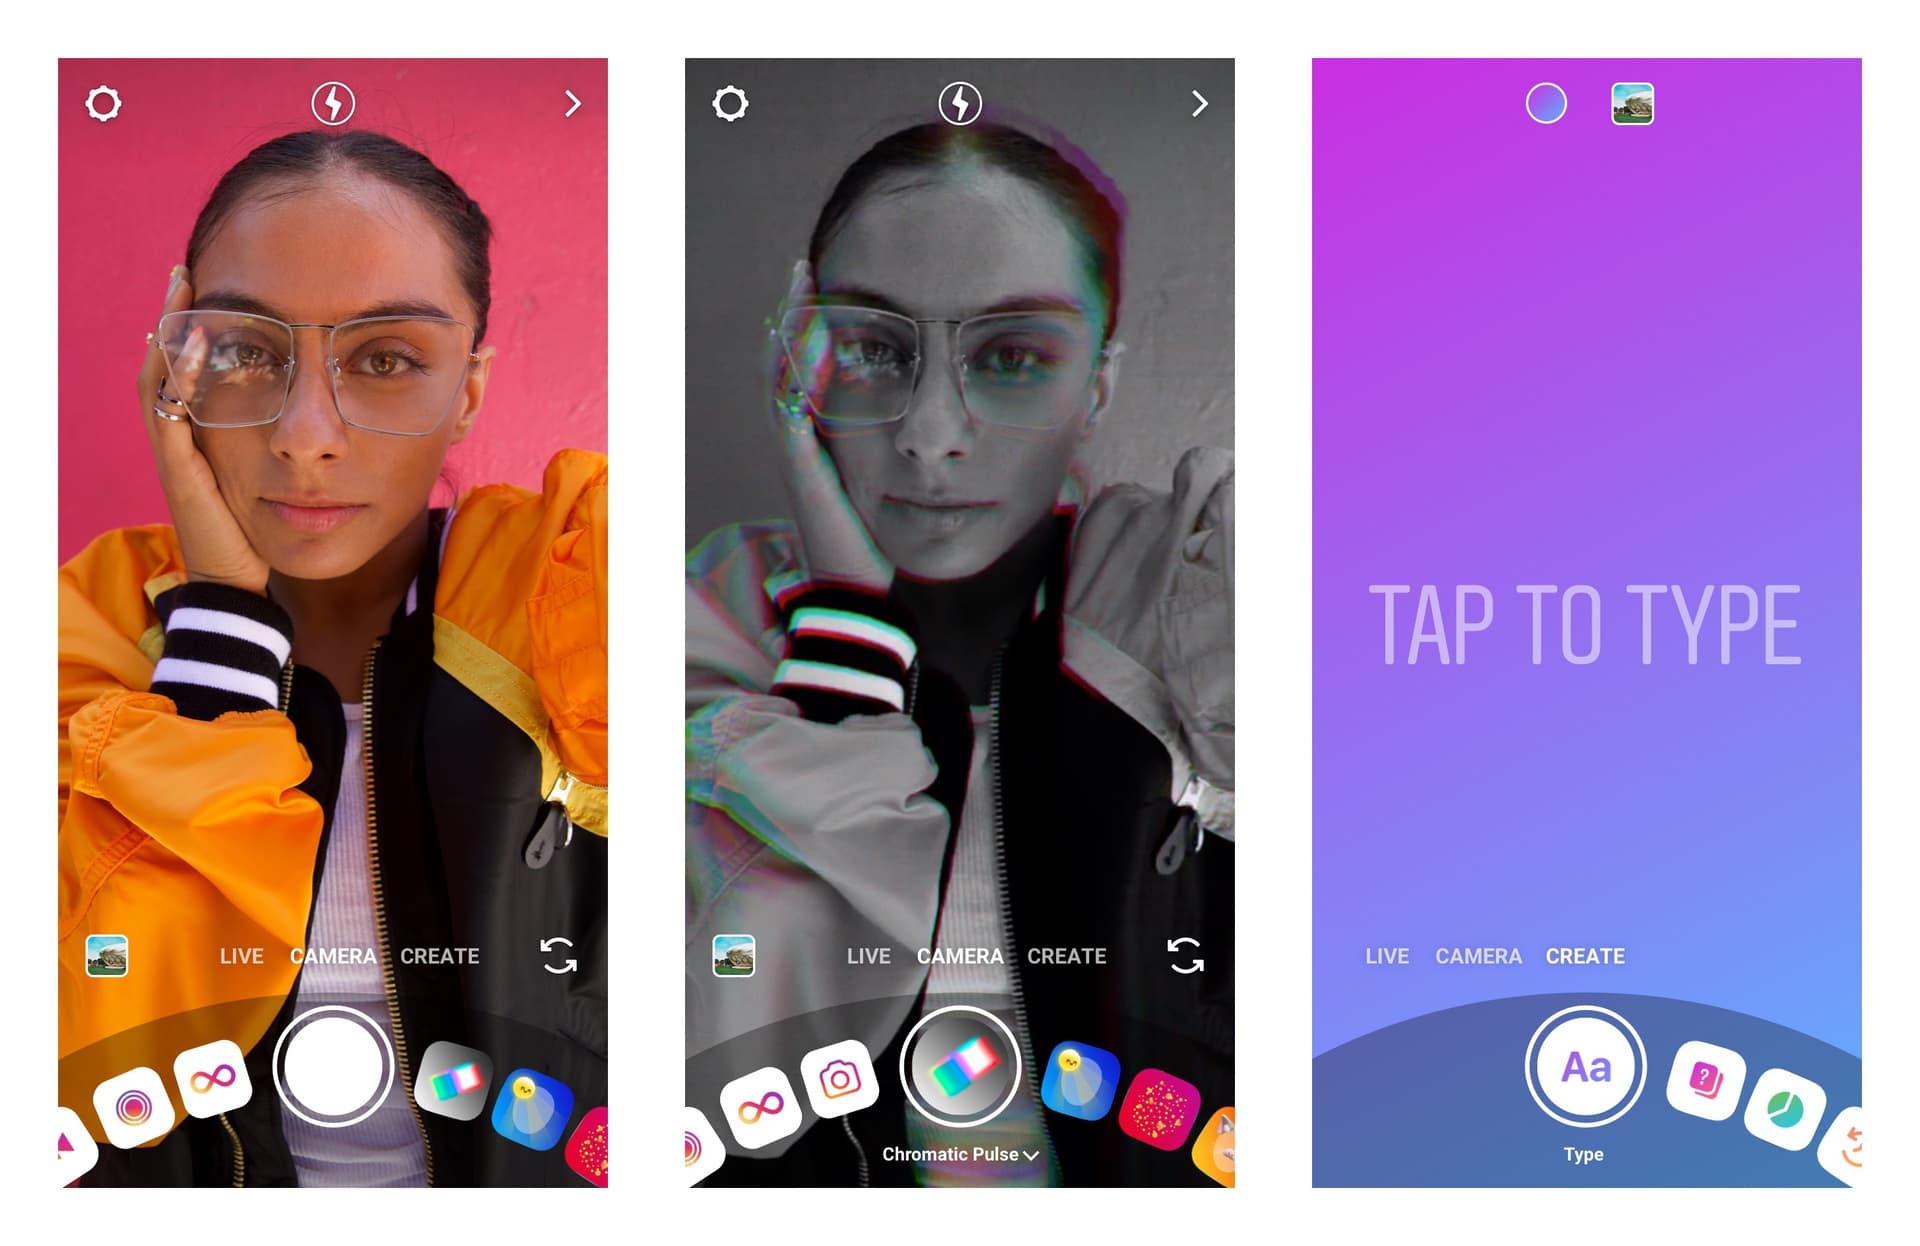 Instagram Stories Camera and Create Mode